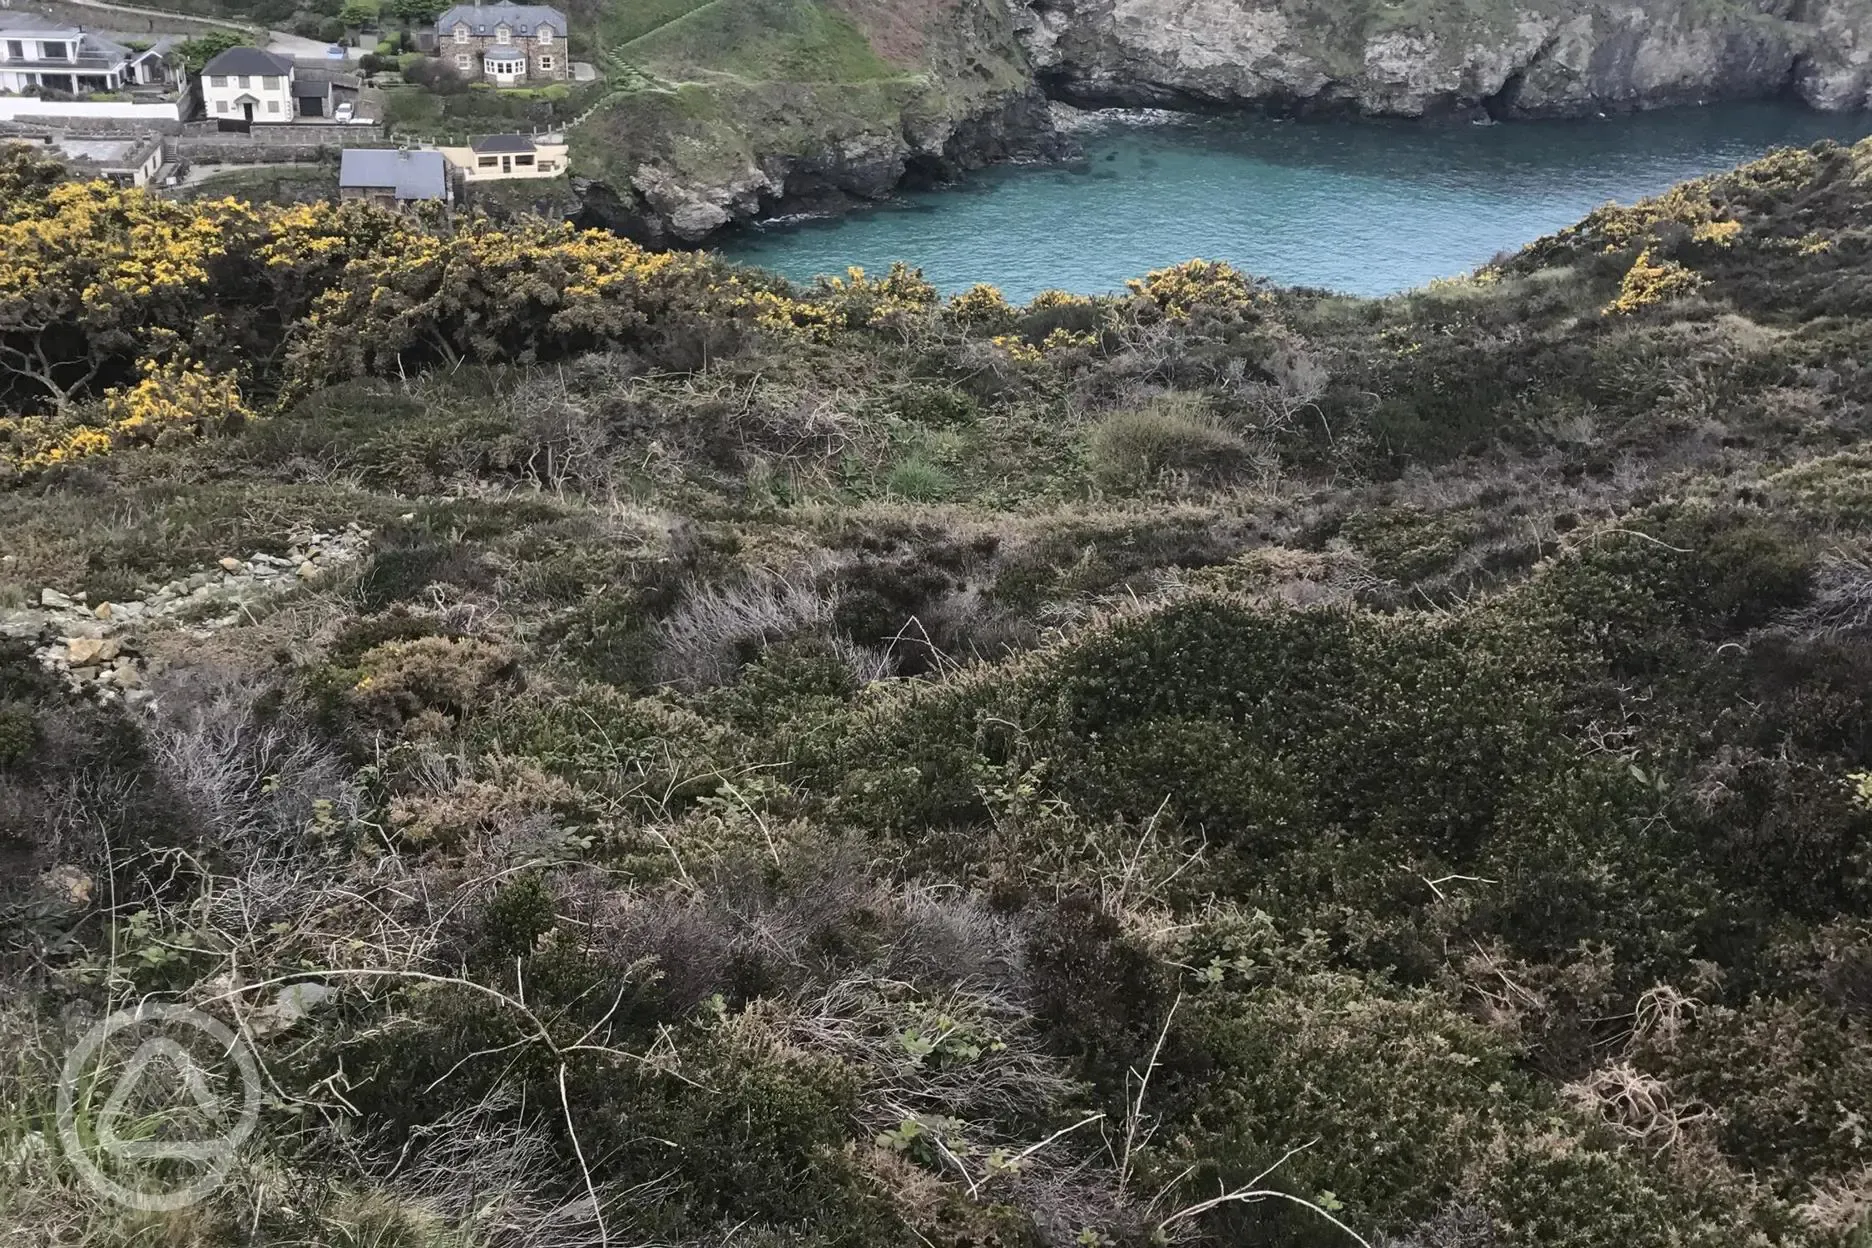 Looking down on Trevaunance cove